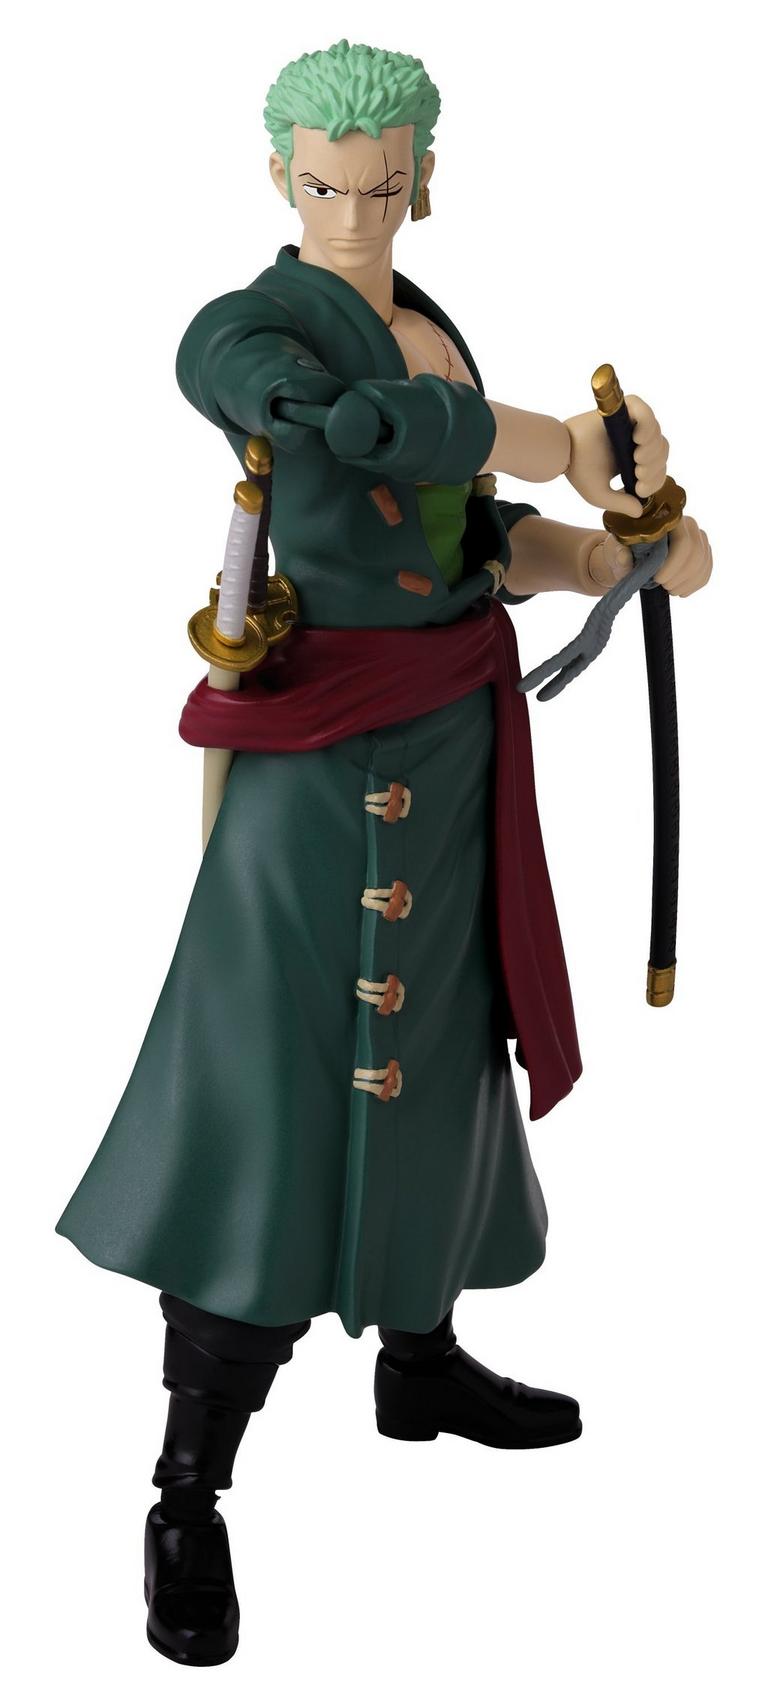 Bandai One Piece Zoro Anime Heroes 6.5-in Action Figure